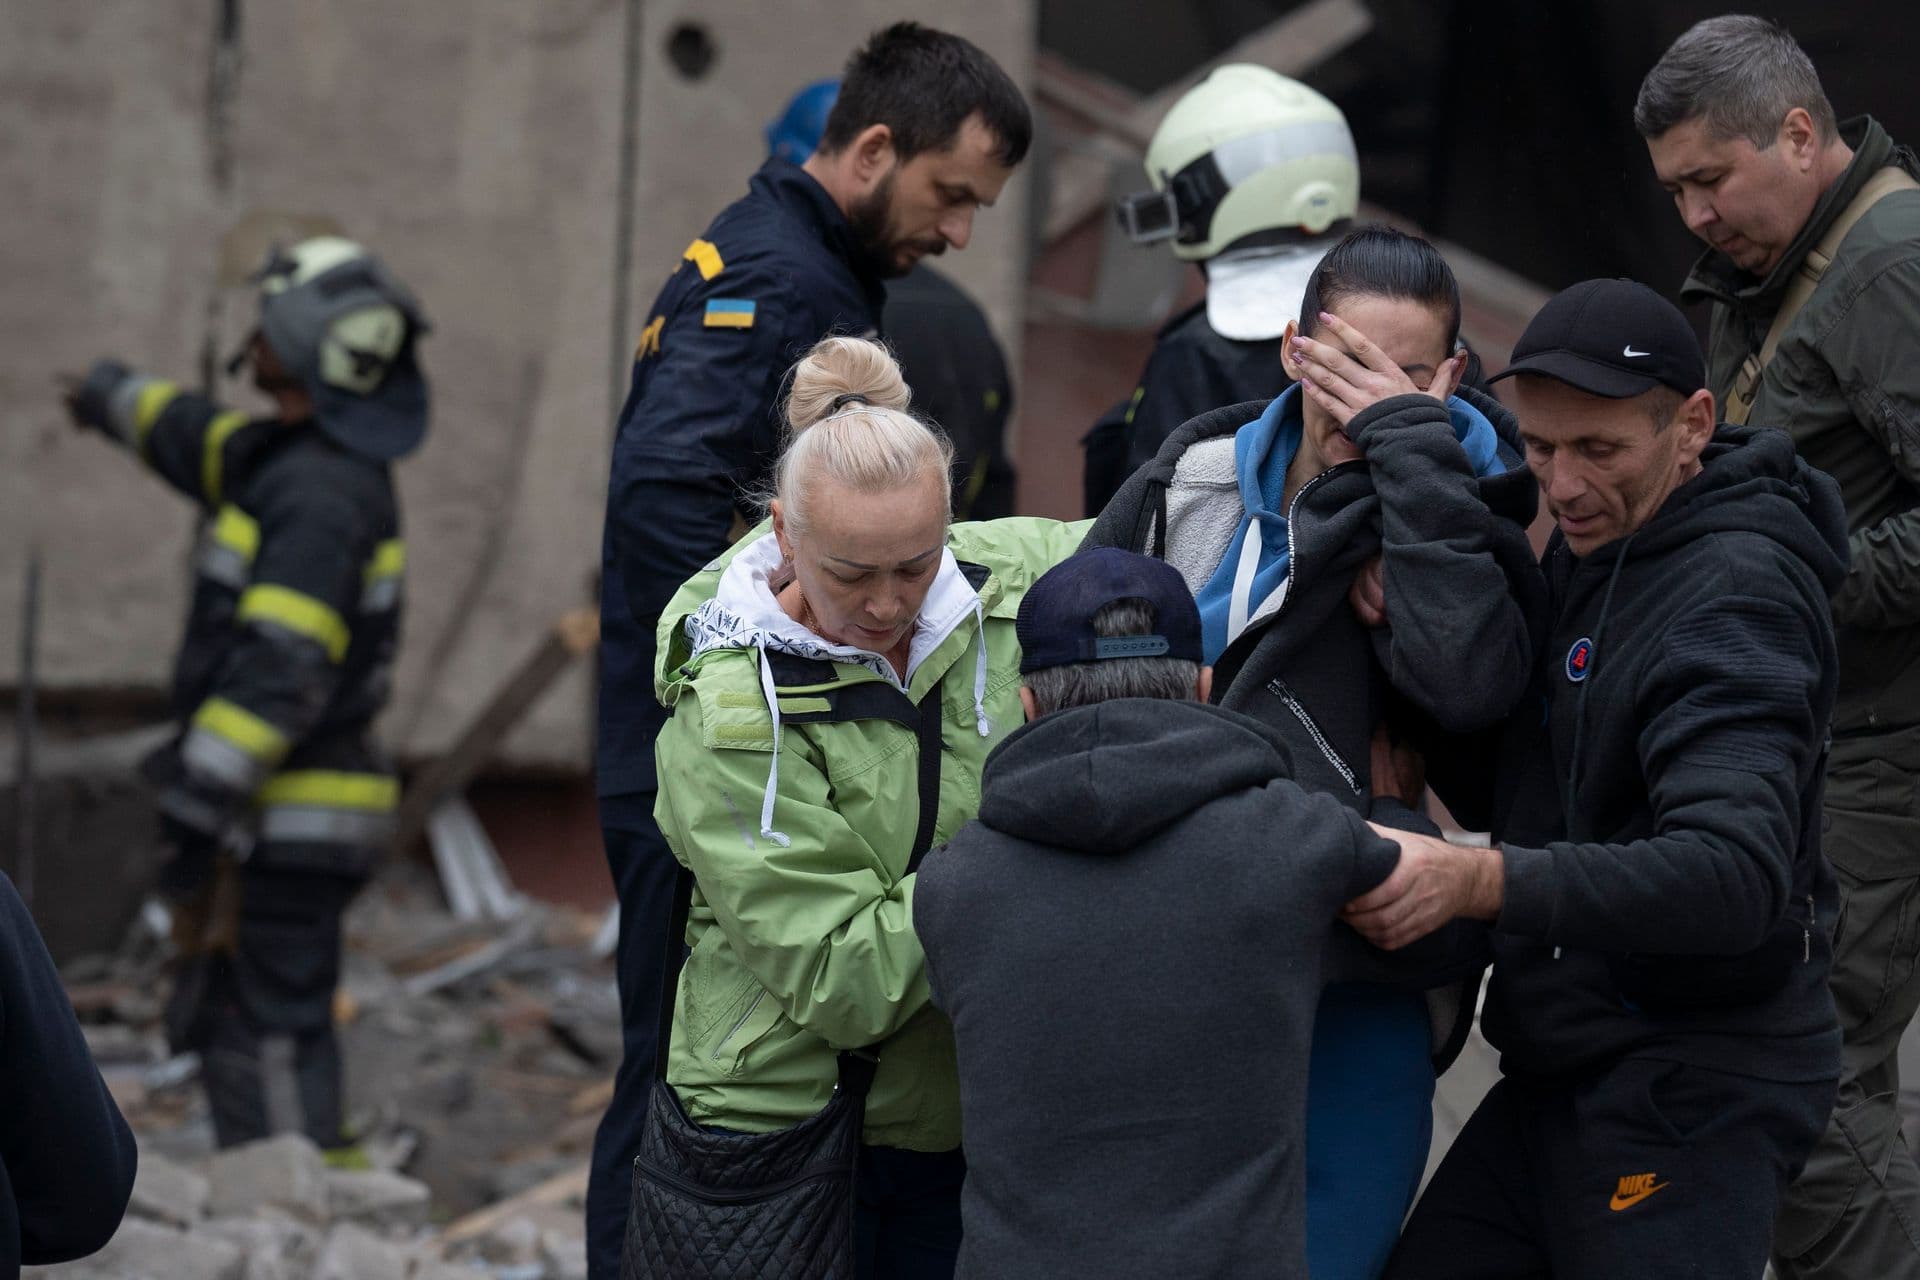 Relatives and friends comfort a woman after Ukrainian rescue workers found a body of a person under the debris following a Russian attack that heavily damaged a school in Mykolaivka